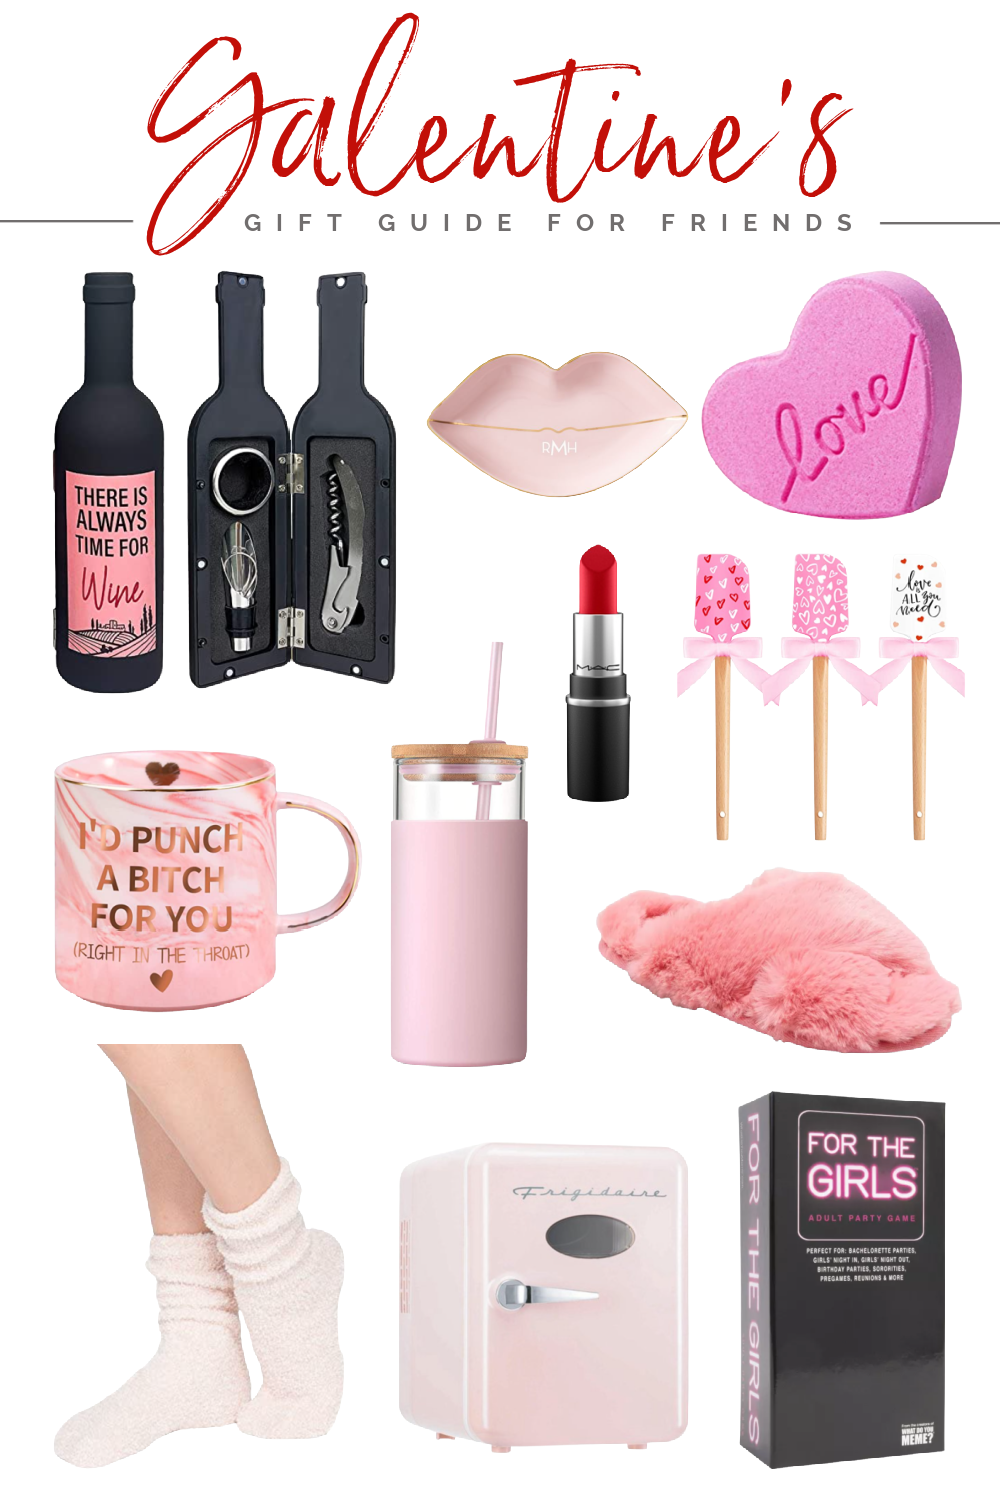 https://rocioisabel.com/wp-content/uploads/2022/02/Galentines-Day-Gift-Guide-For-Friends-Gifts-For-Galentines-_-RocioIsabel.png